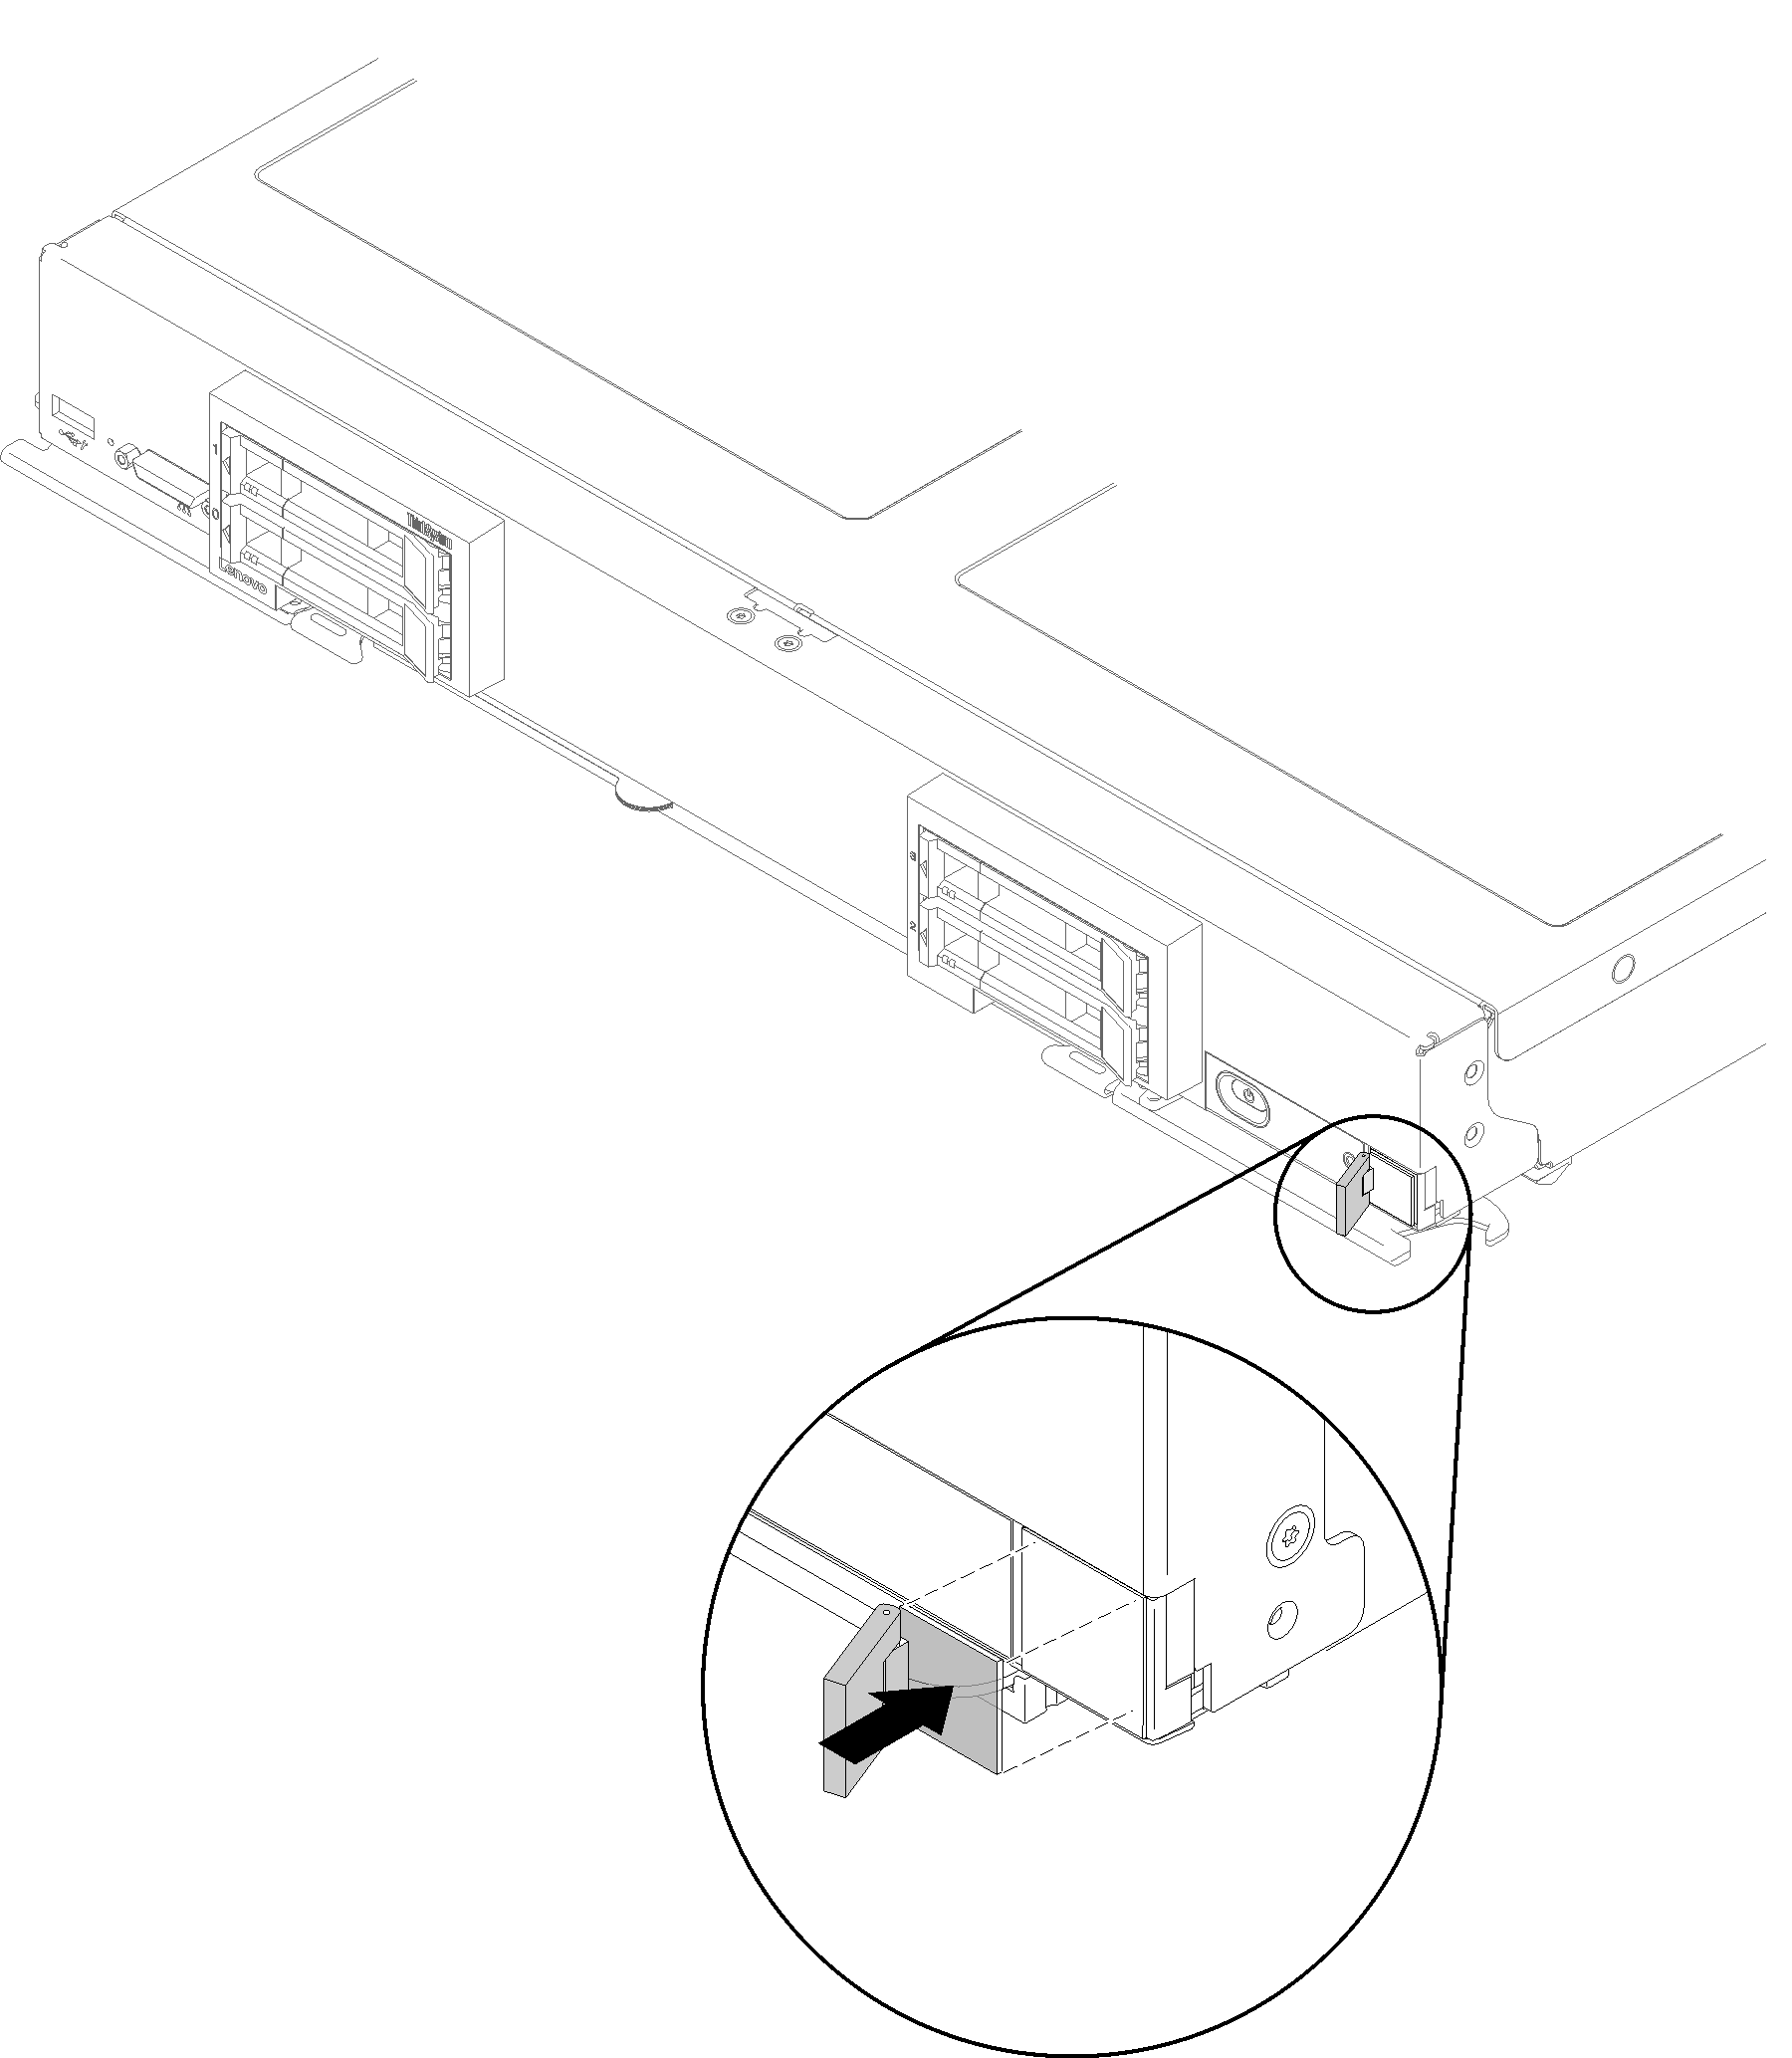 Graphic illustrating the installation of an RFID tag